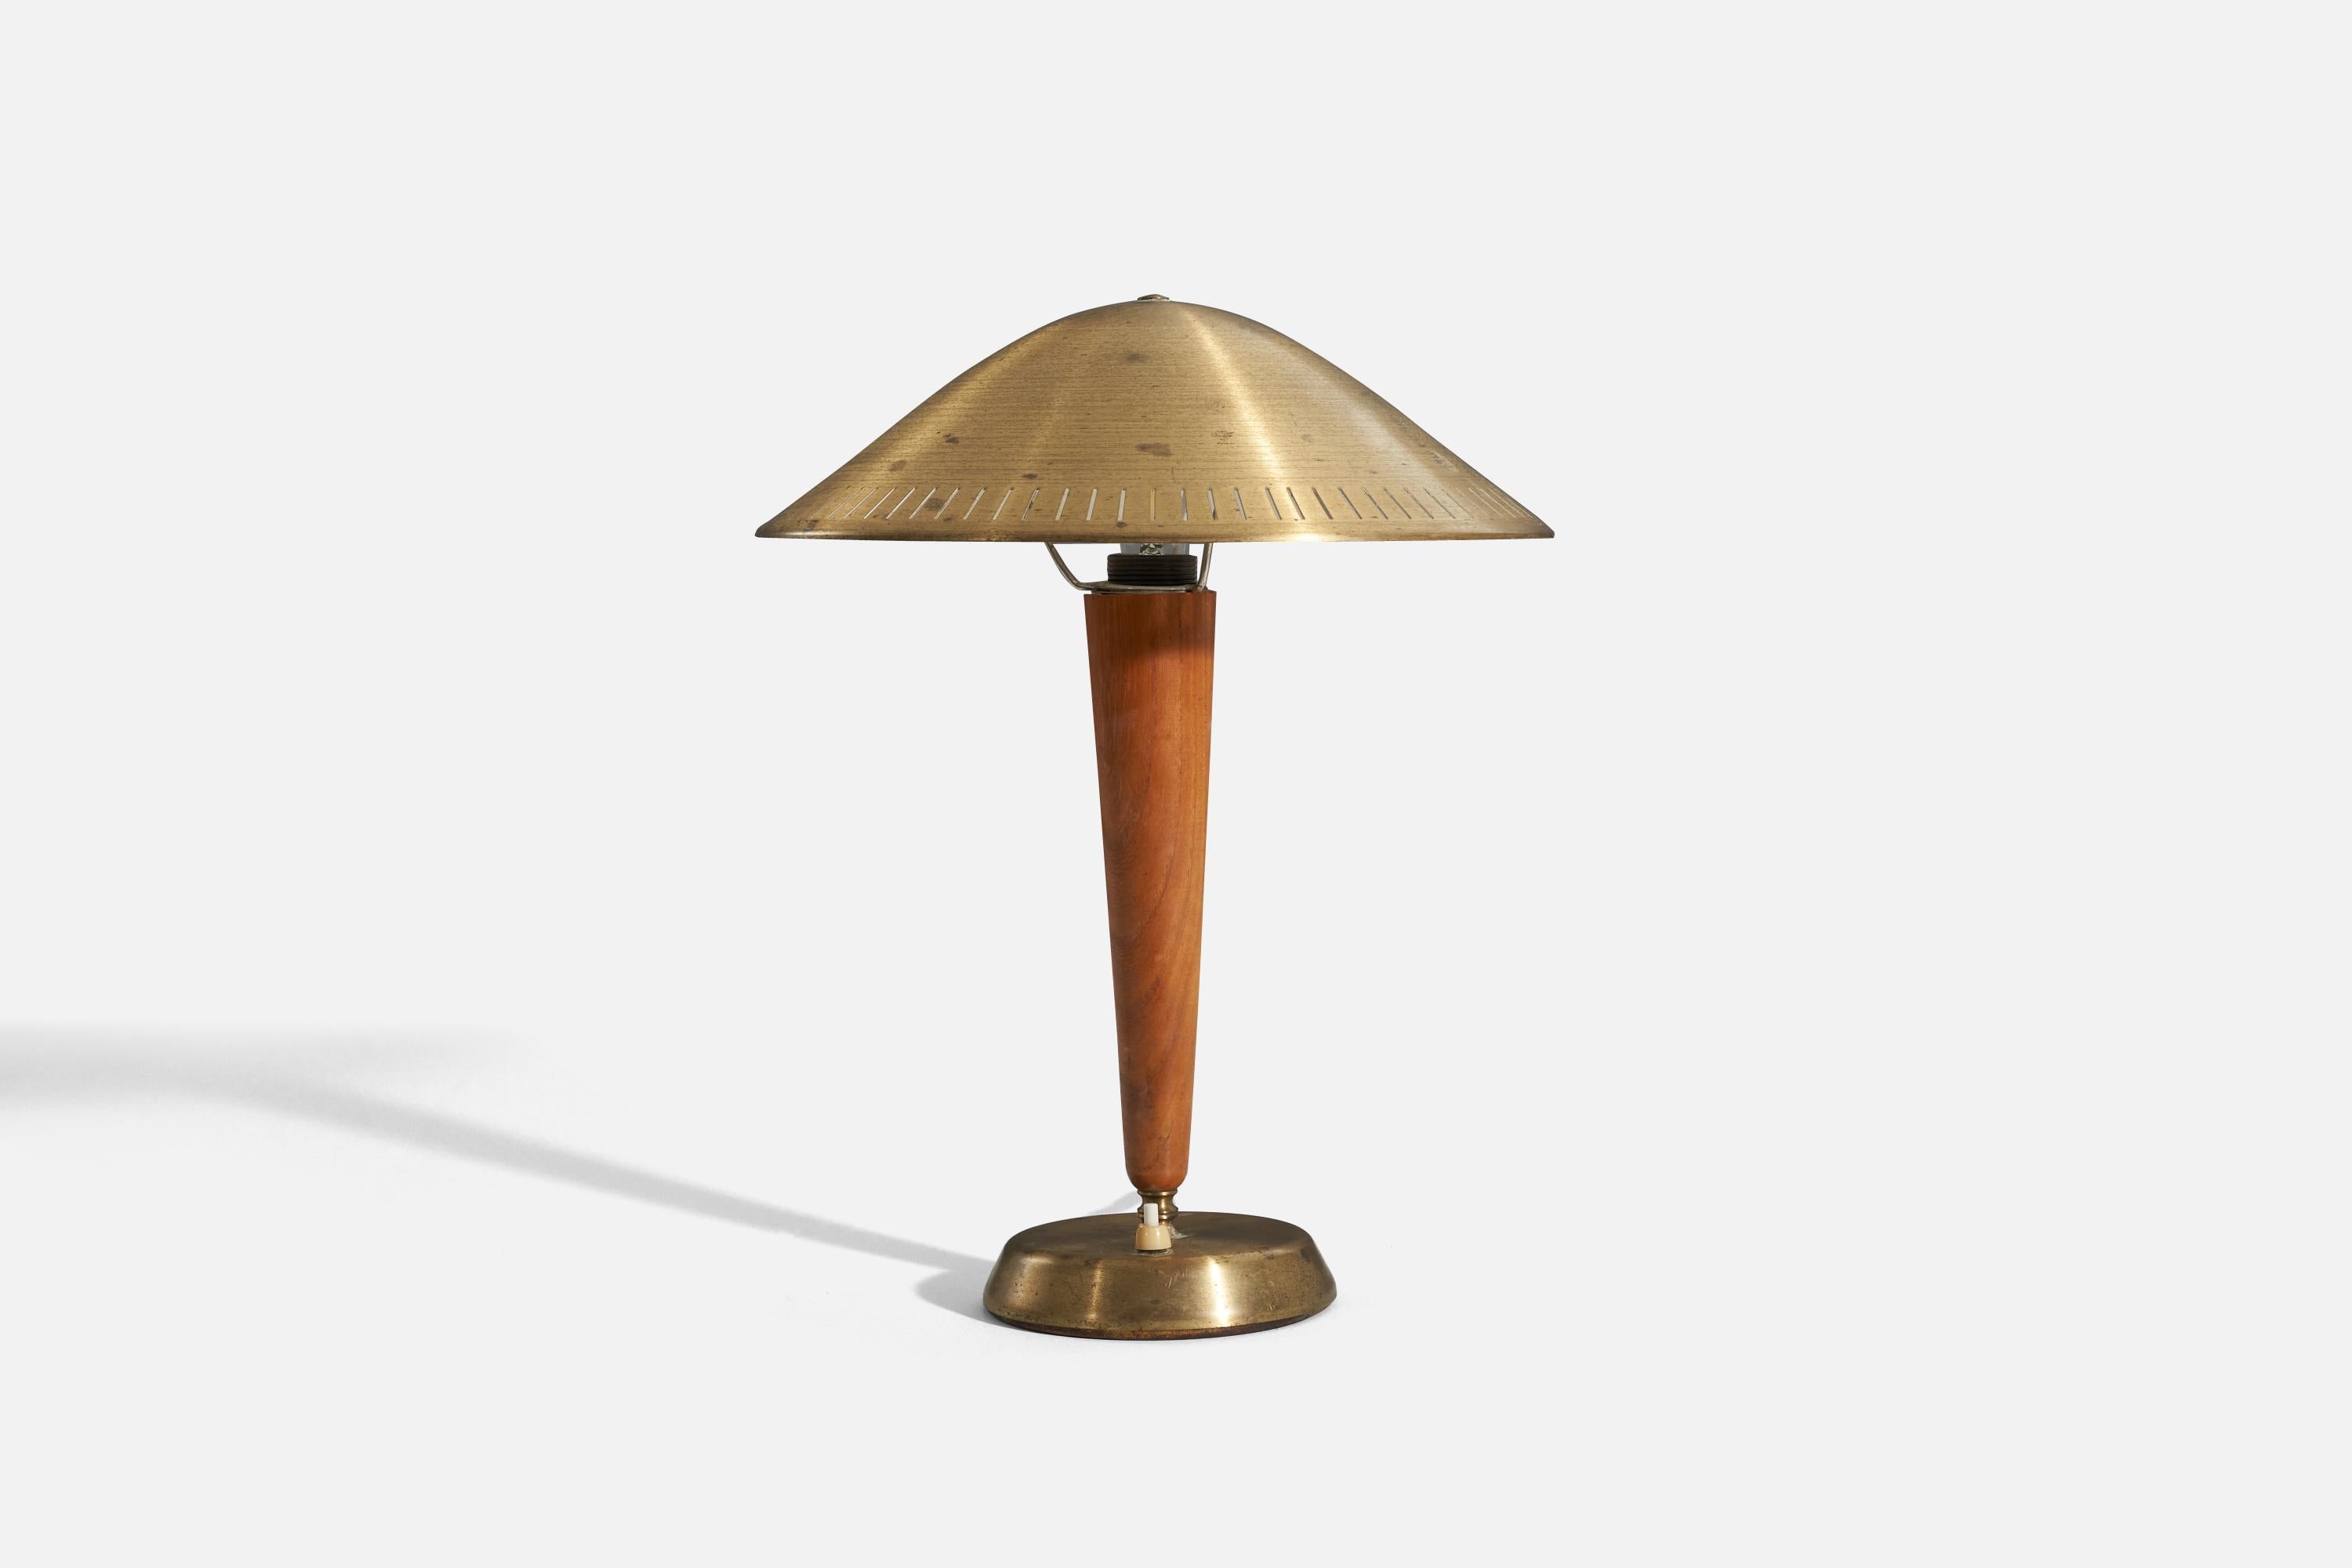 A brass and elm desk light / table lamp designed and produced by ASEA, Sweden, 1940s.

